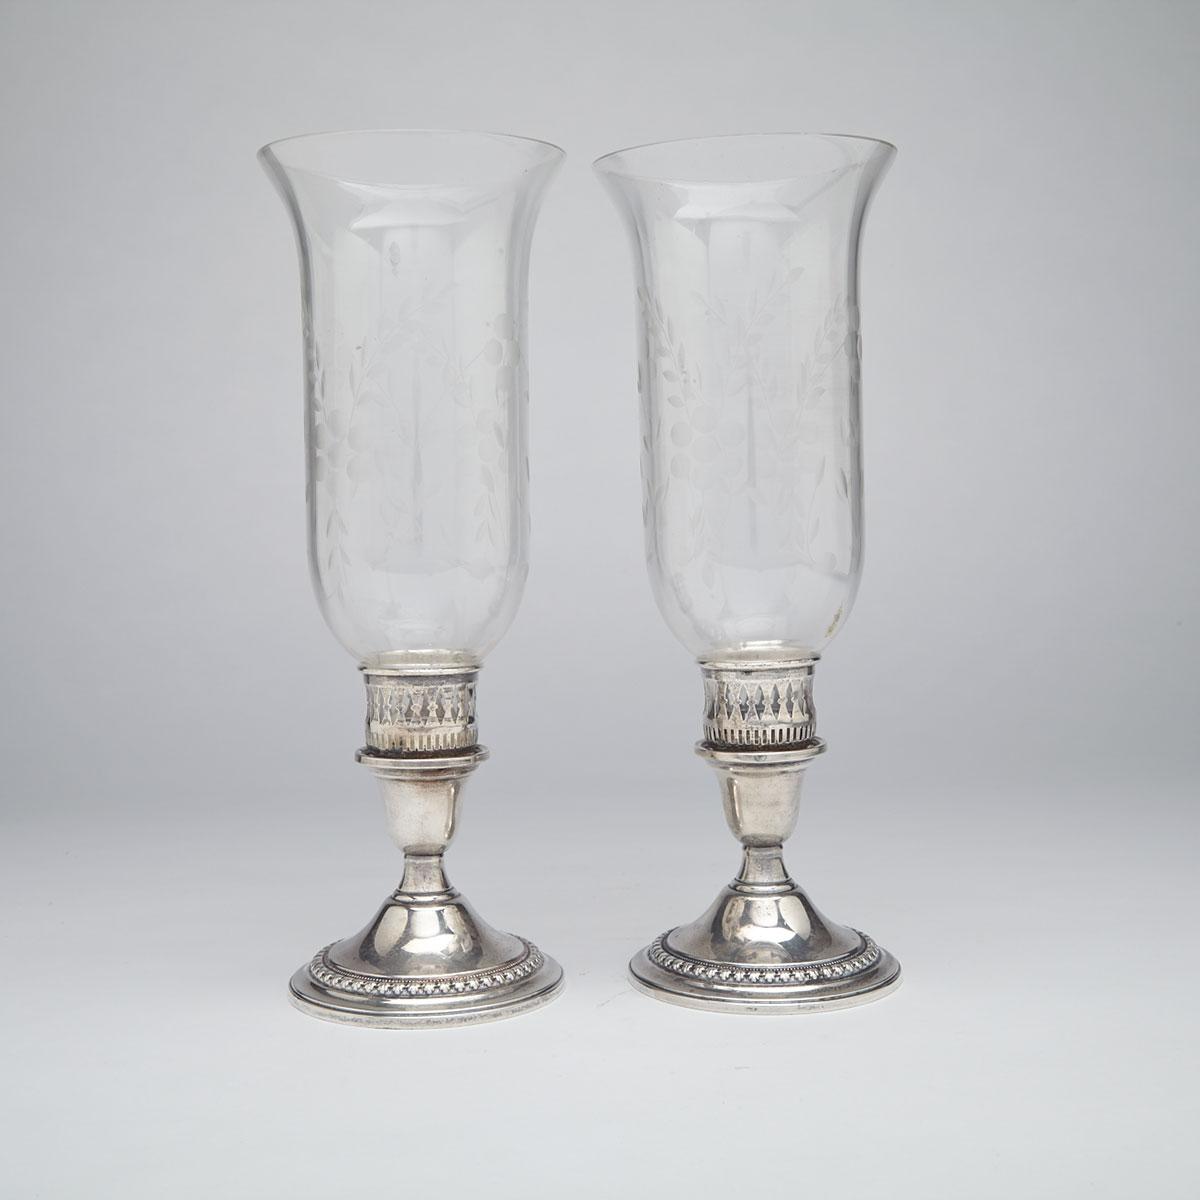 Pair of American Silver Low Candlesticks, International Silver Co., Meriden, Ct., 20th century